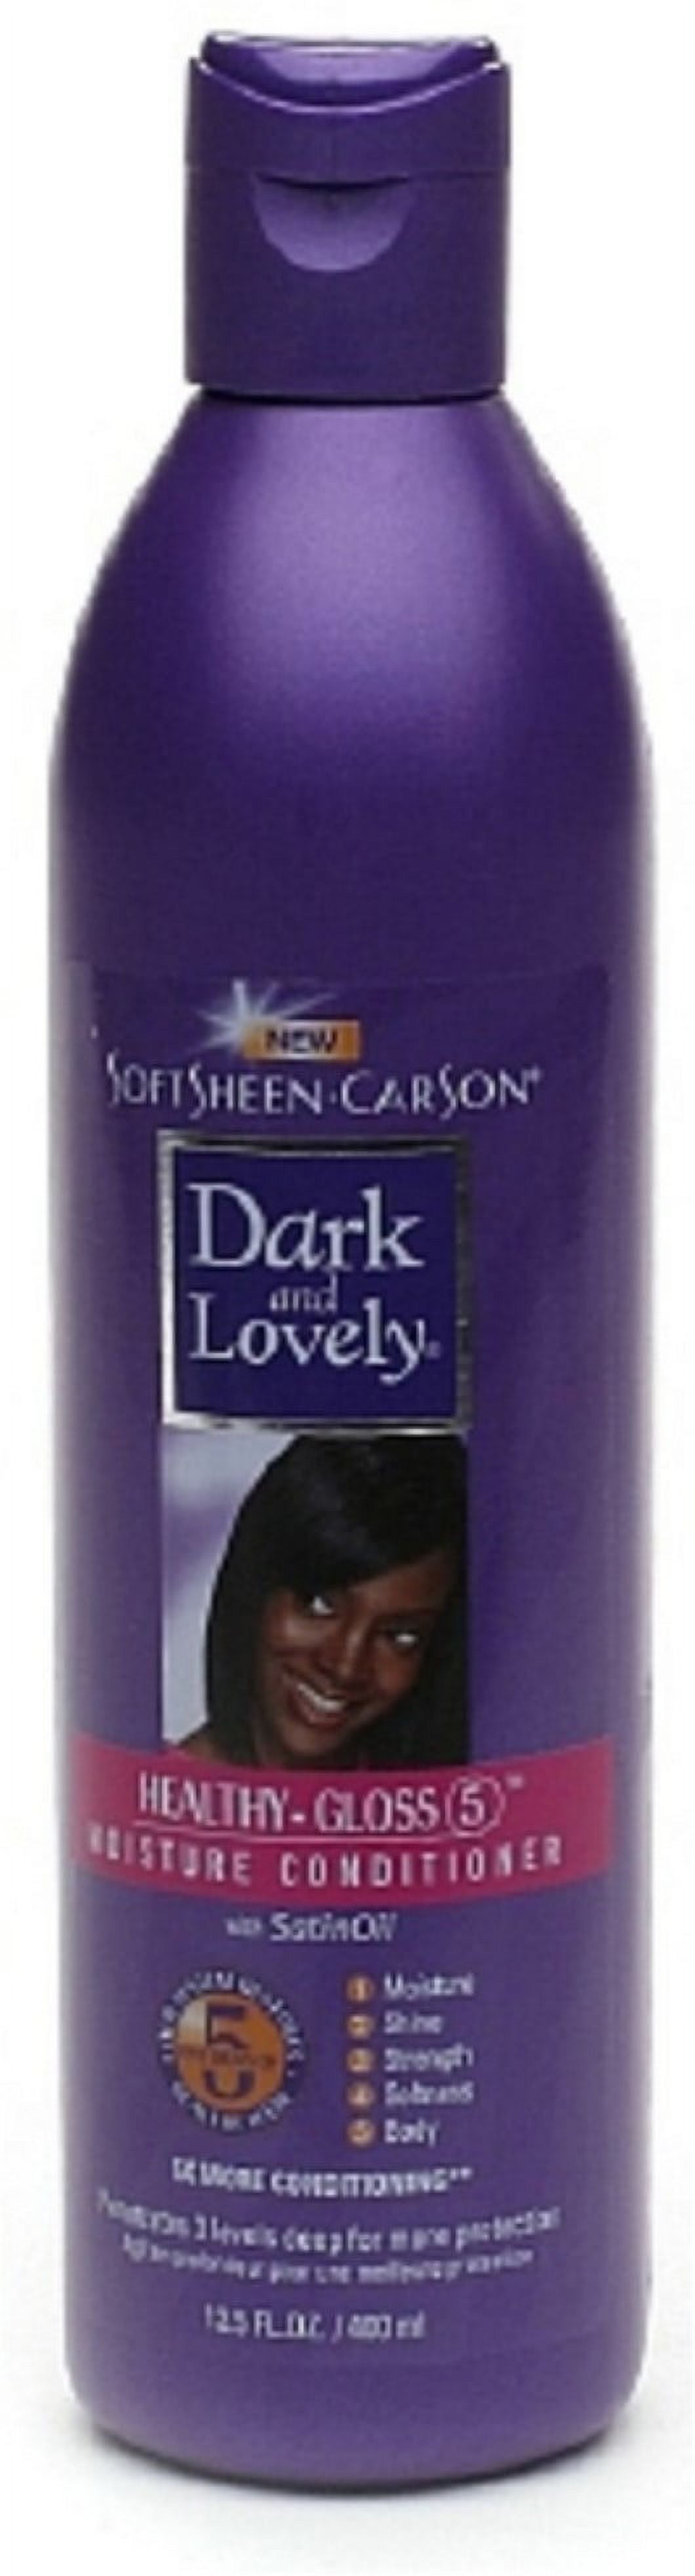 Dark and Lovely Healthy-Gloss 5 Moisture Conditioner 13.5 oz - image 1 of 2